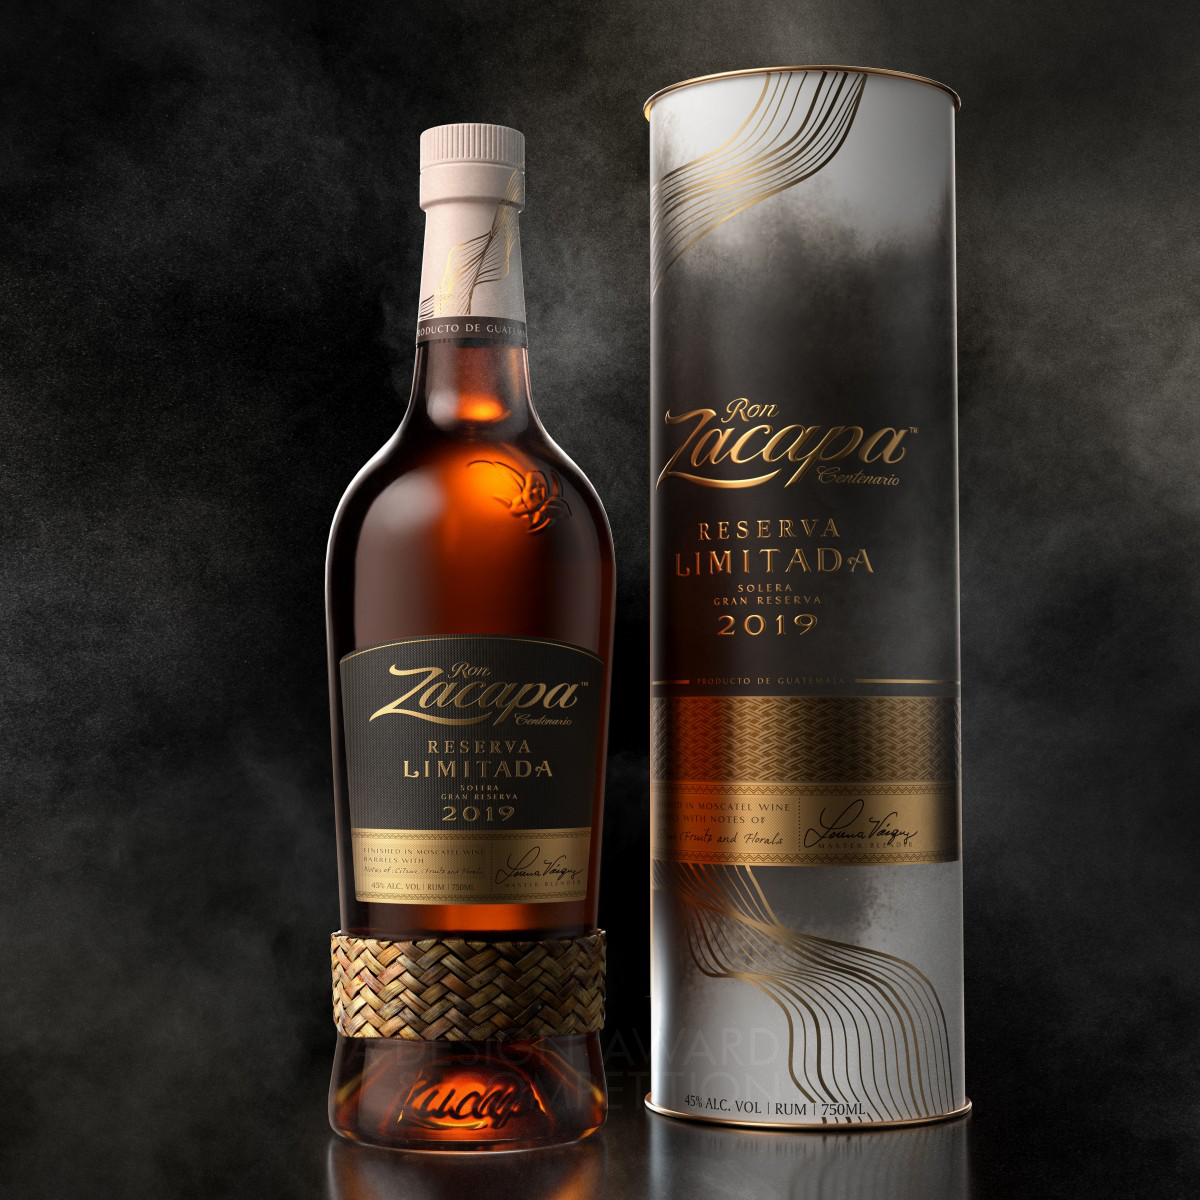 Laurent Hainaut wins Golden at the prestigious A' Limited Edition and Custom Design Award with Zacapa Reserva Limitada 2019 Branding and Design.